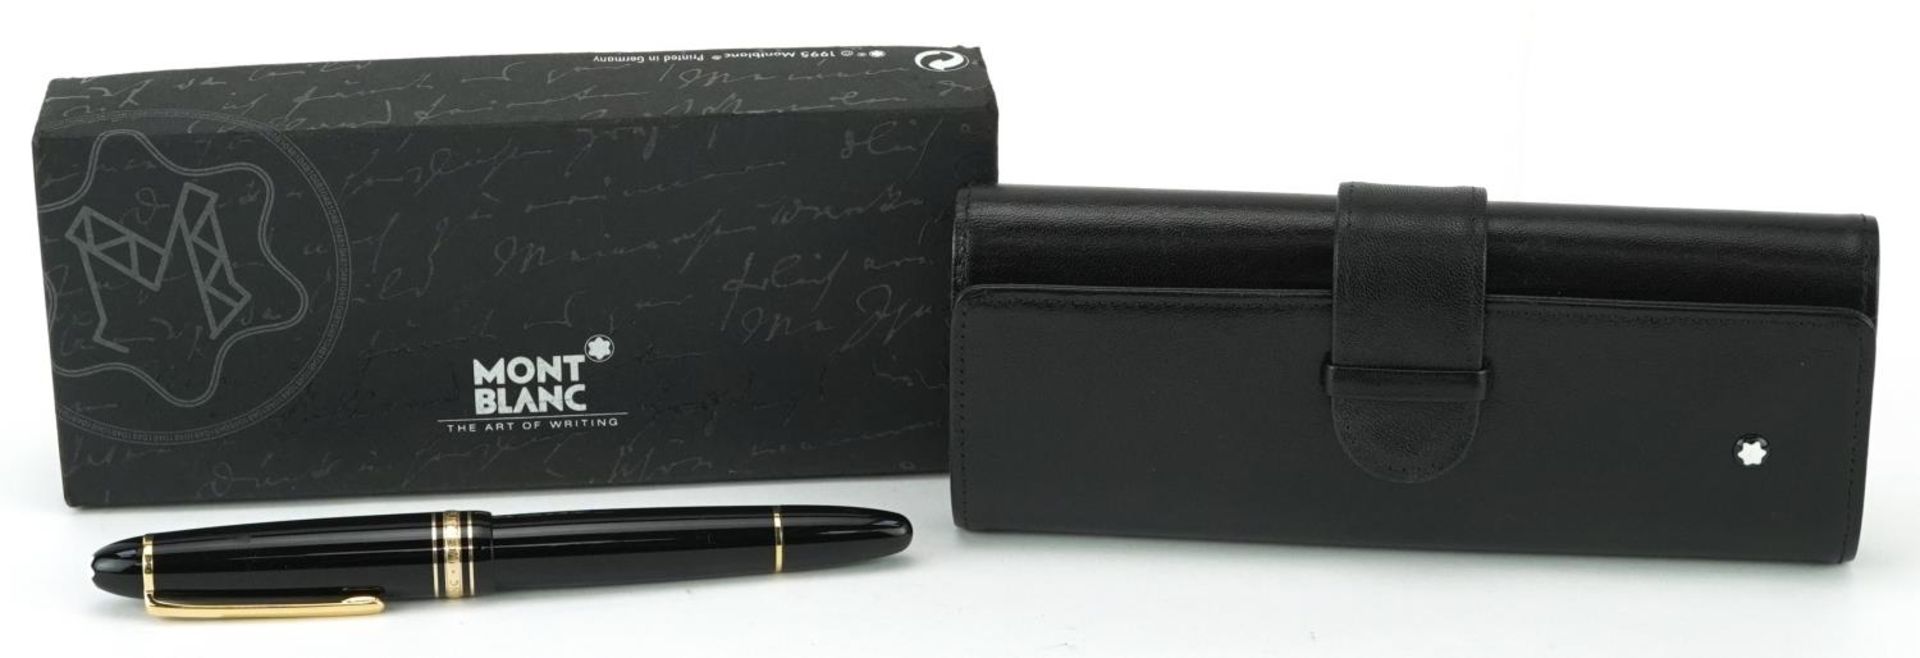 Montblanc Meisterstuck Traveller fountain pen with 14K gold nib, leather case and box